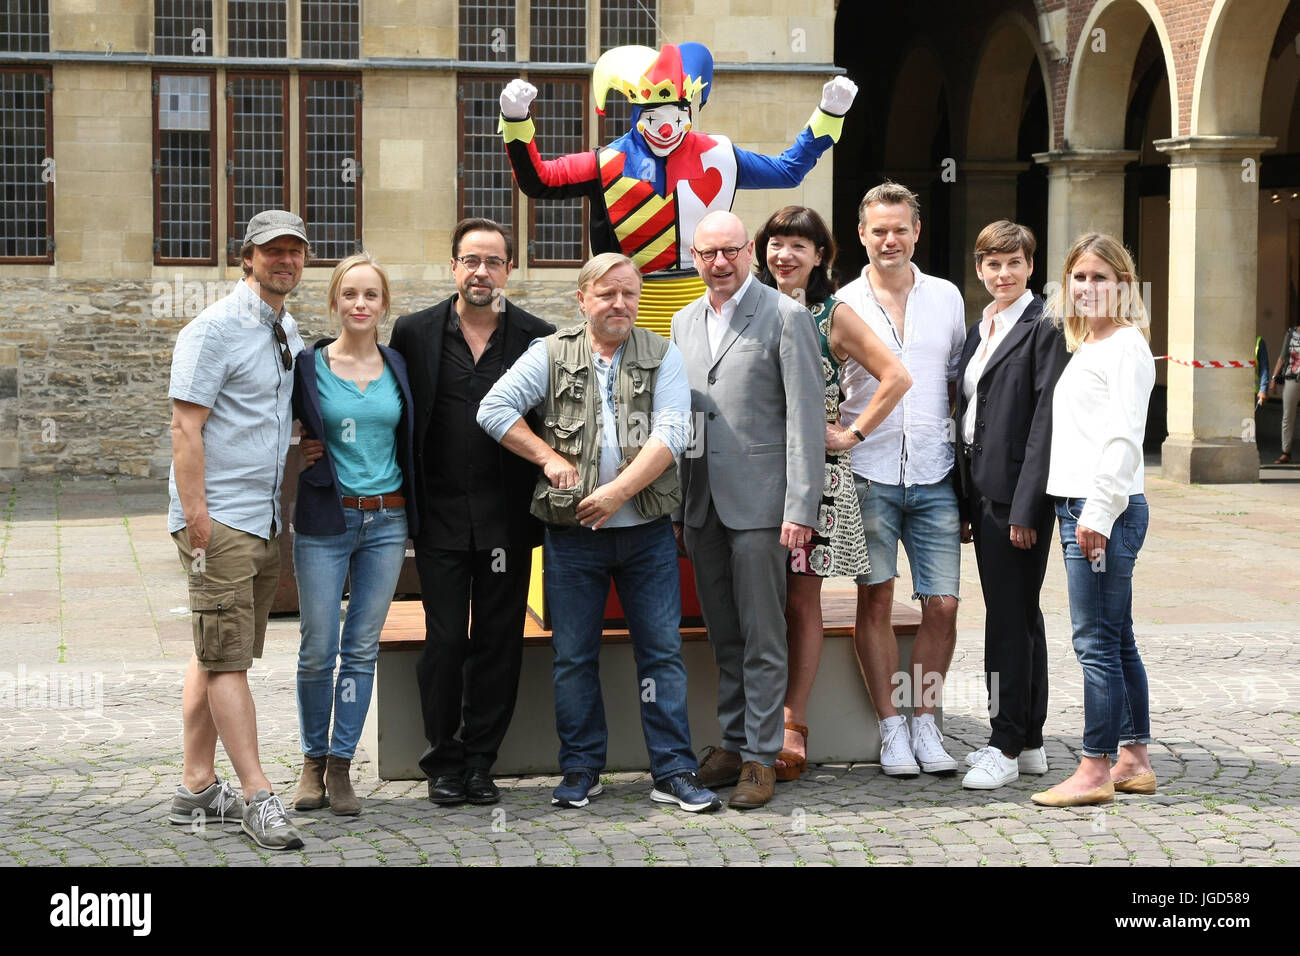 Muenster, Germany. 05th July, 2017. The acting ensemble with Jan Josef Liefers, Axel Prahl and Friederike Kempter pose during a photocall on set of the WDR Tatort 'Gott ist auch nur ein Mensch' at Westfaelisches Landesmuseum on July 5, 2017 in Muenster, Germany Credit: Maik Boenisch/Pacific Press/Alamy Live News Stock Photo